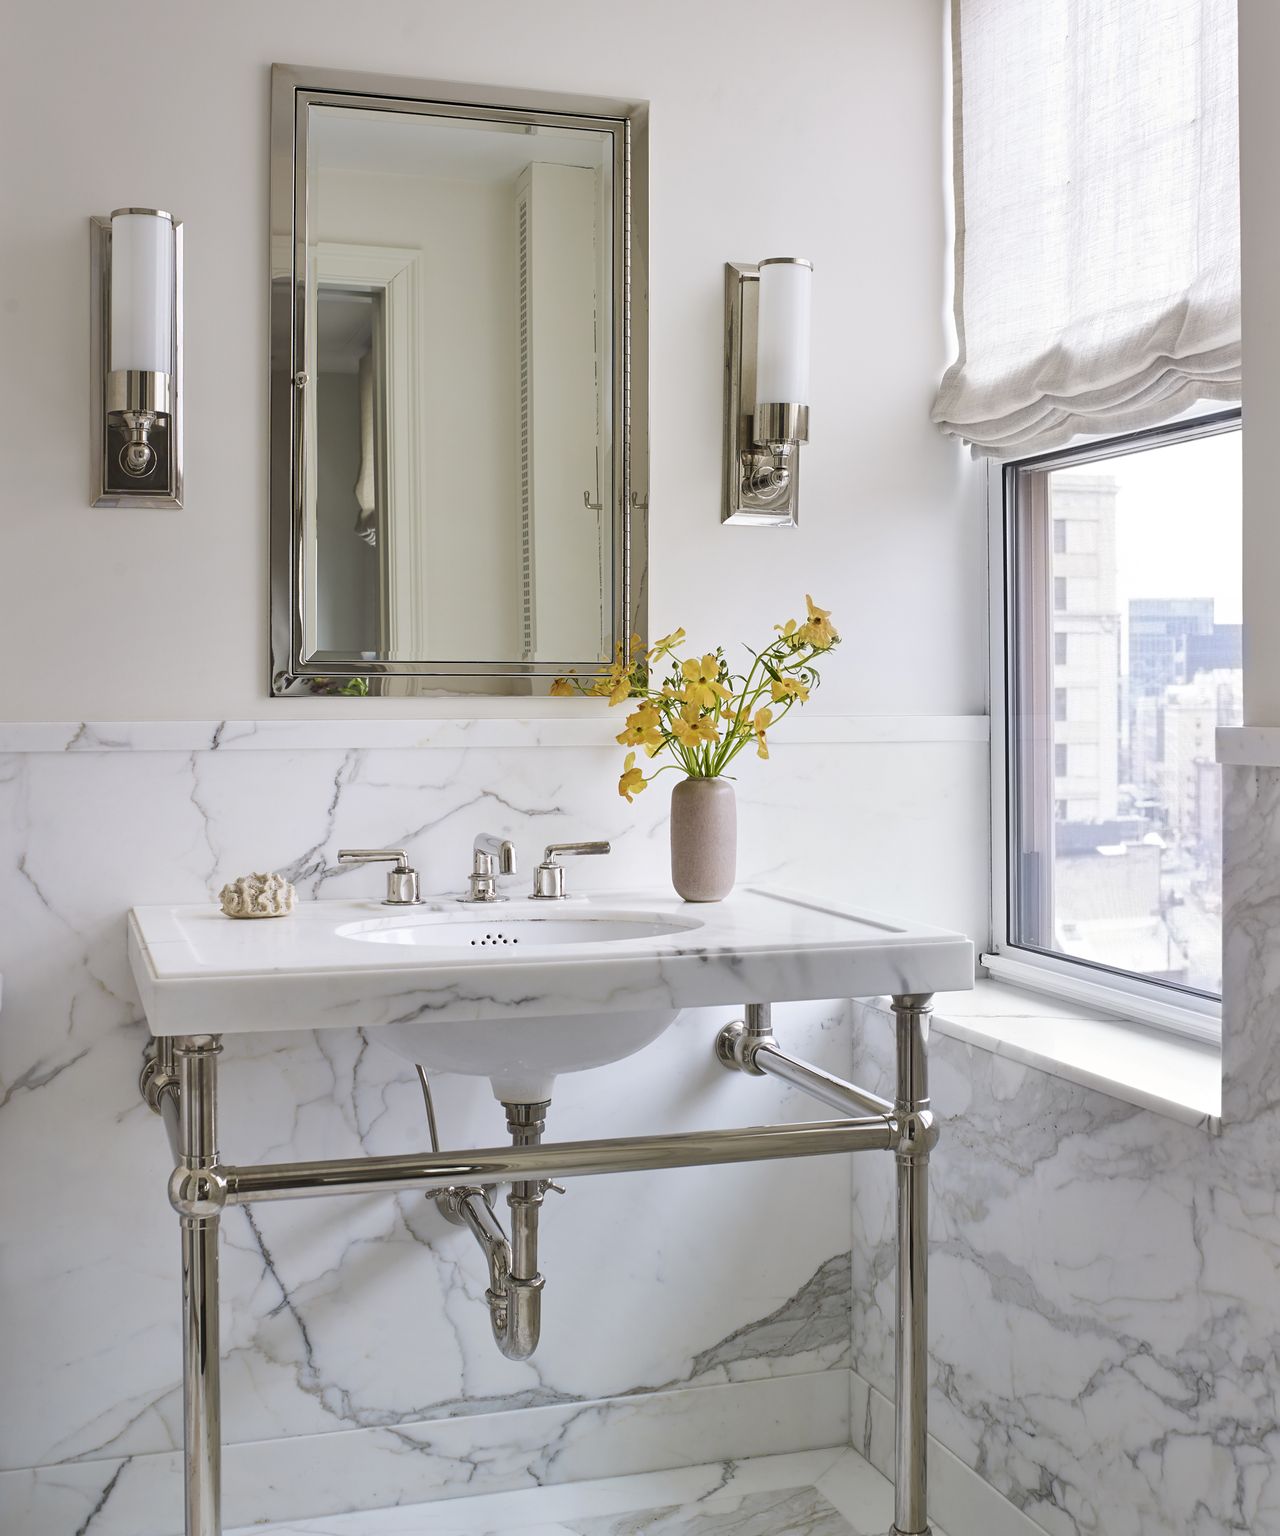 Design House: 1930s New York apartment gets a stylish update | Homes ...